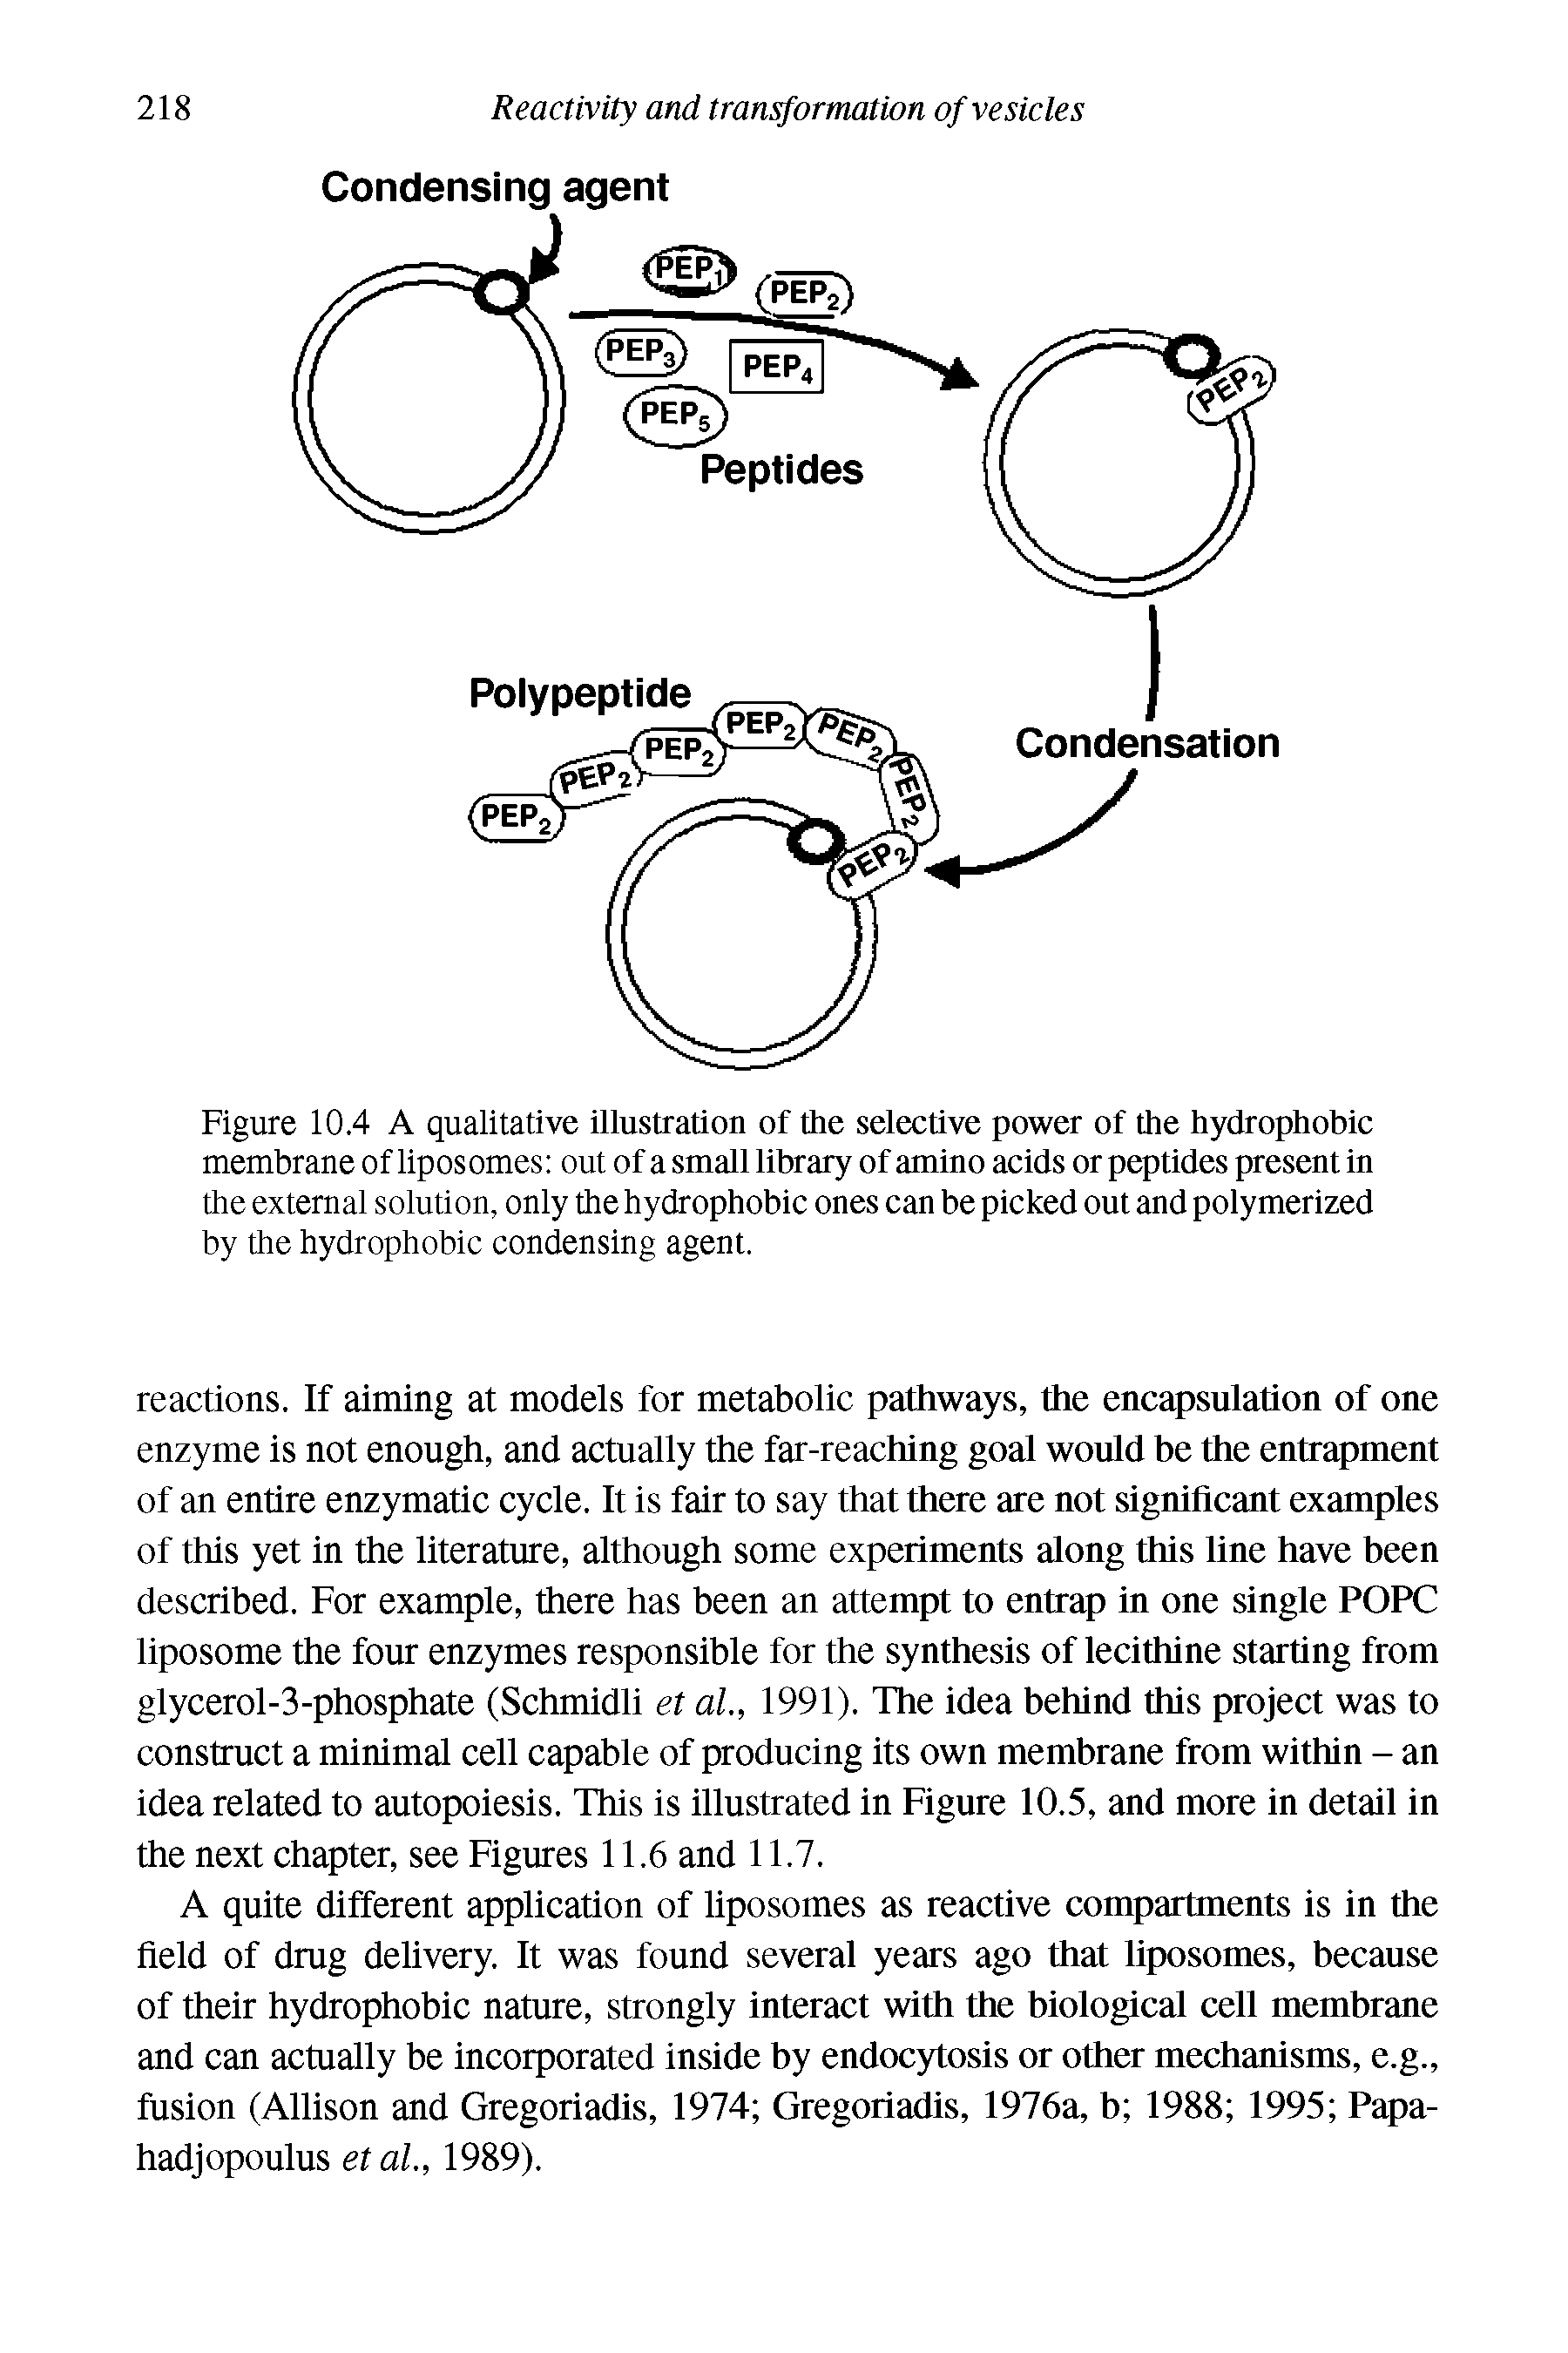 Figure 10.4 A qualitative illustration of the selective power of the hydrophobic membrane of liposomes out of a small library of amino acids or peptides present in the external solution, only the hydrophobic ones can be picked out and polymerized by the hydrophobic condensing agent.